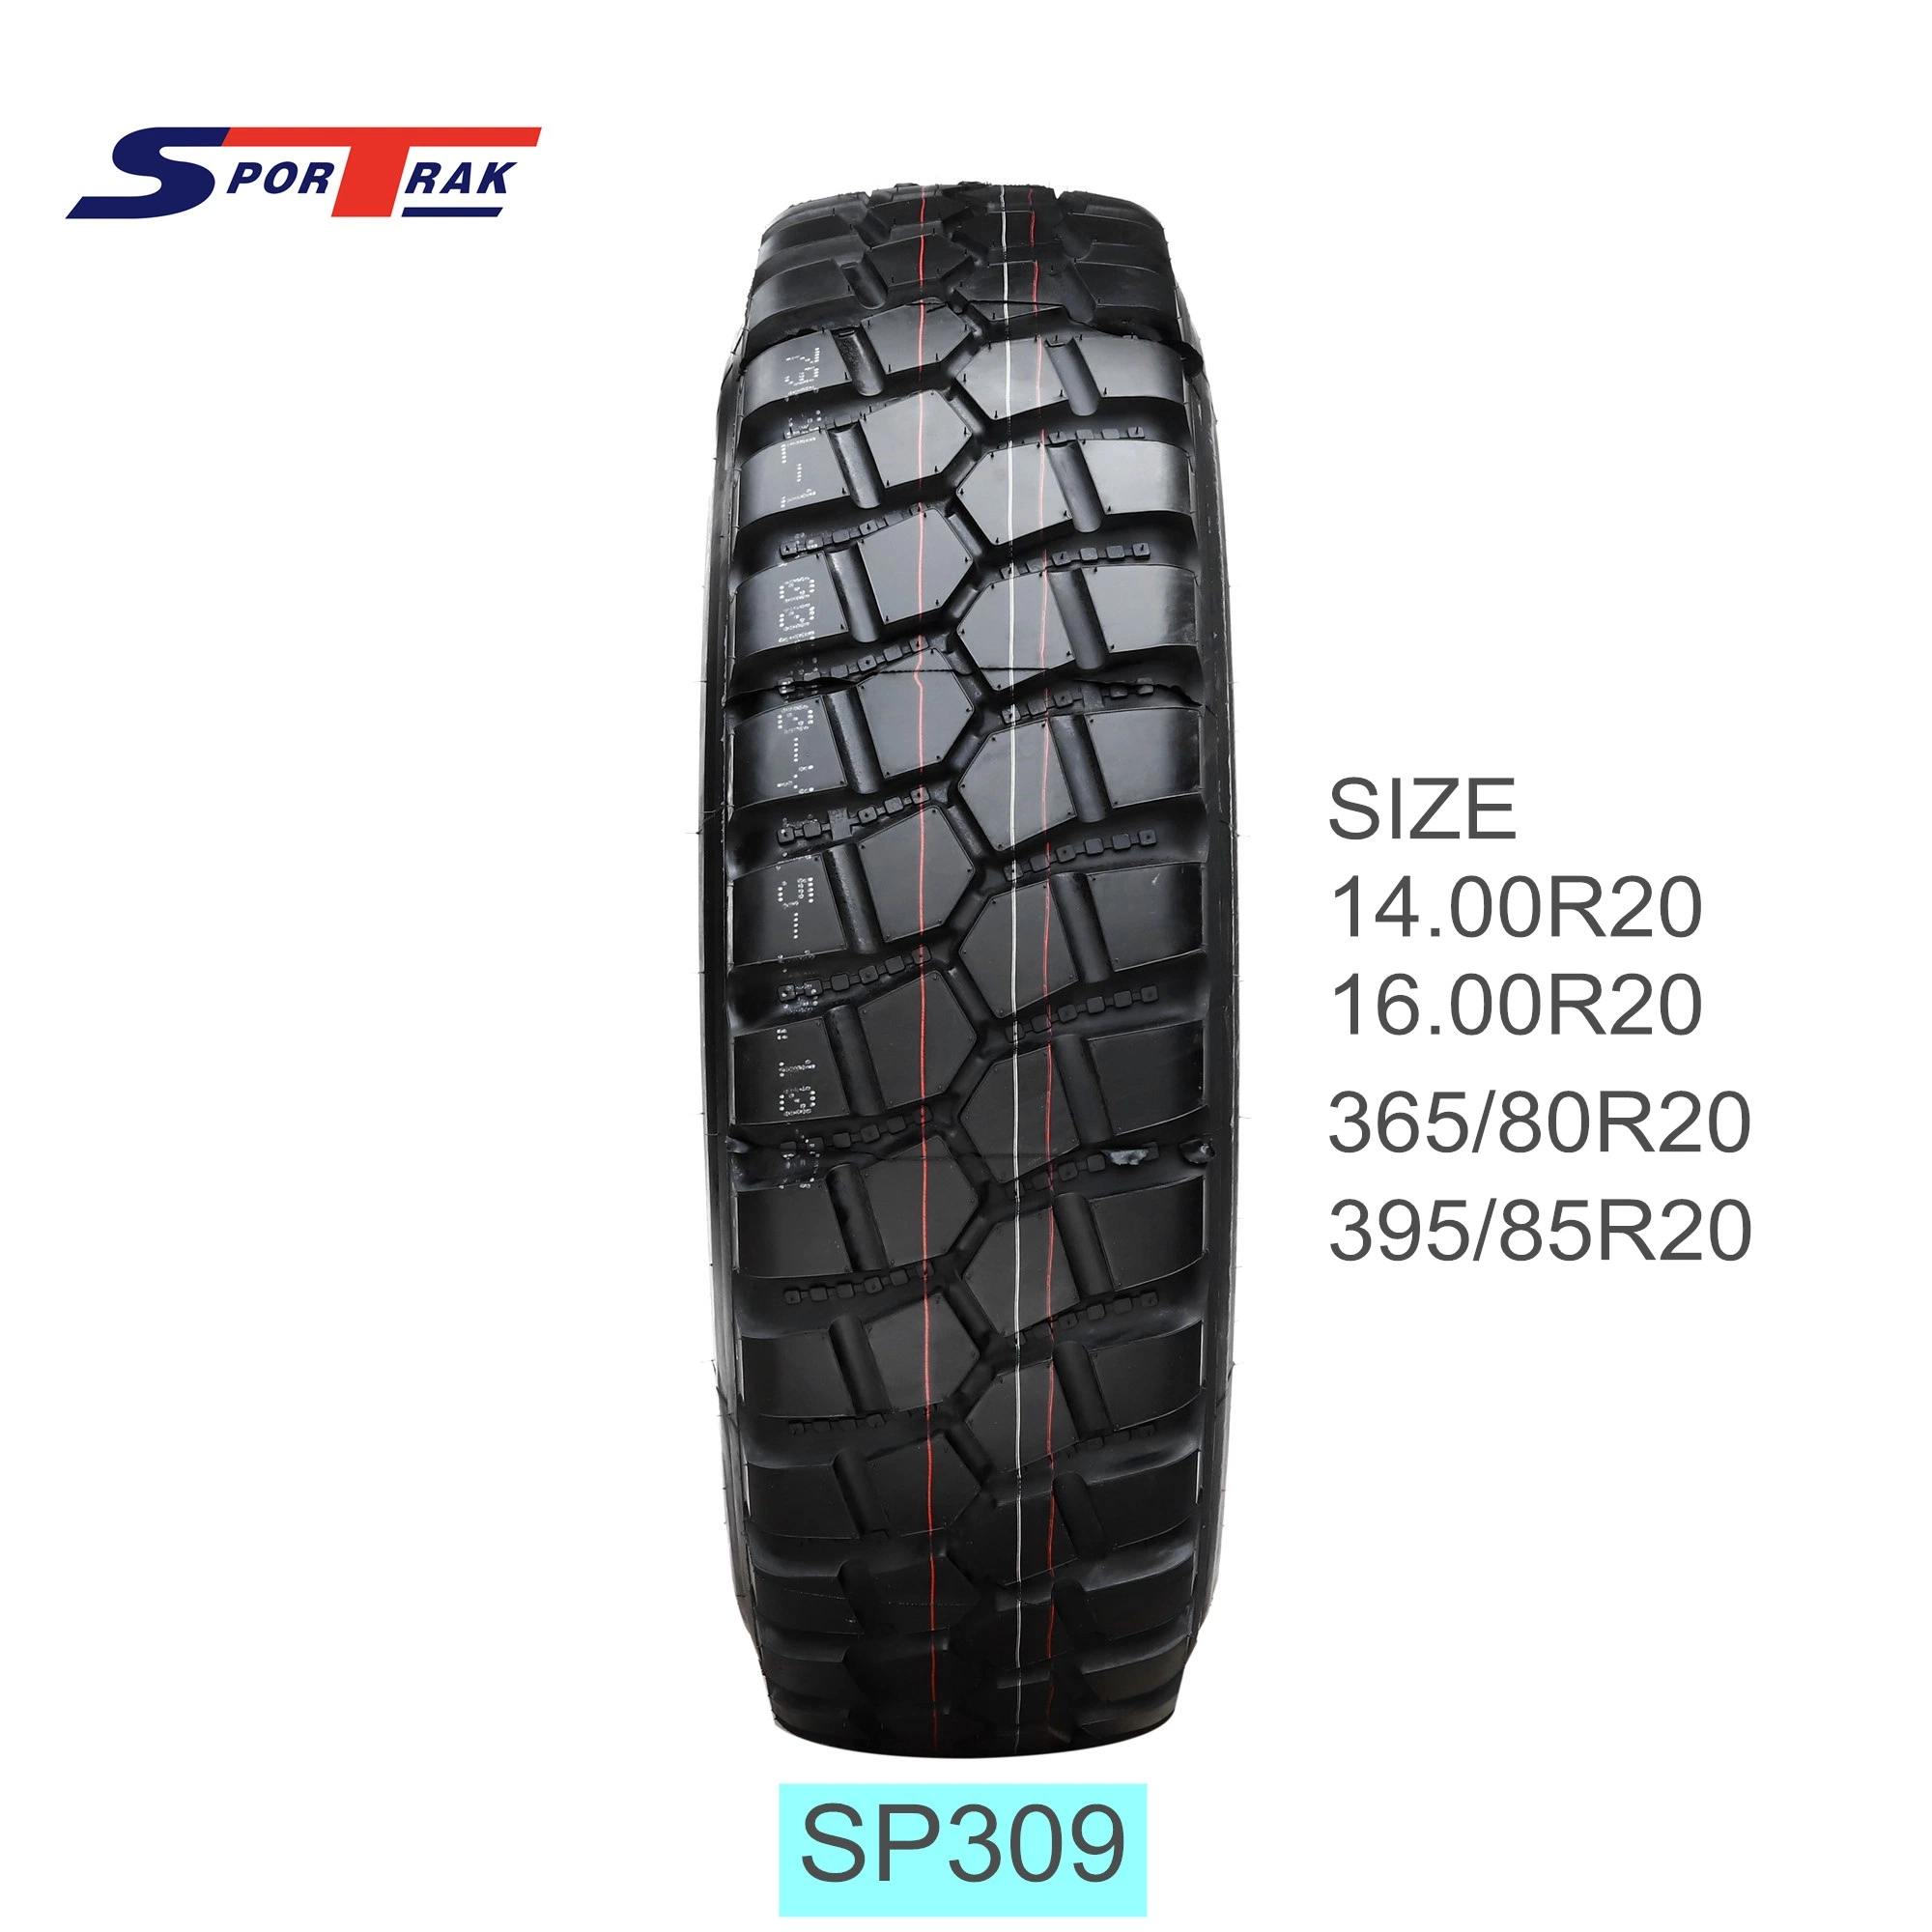 Heavy Duty Truck Tyre, Overload Capacity Wholesale/Supplier Commercial Truck Tires